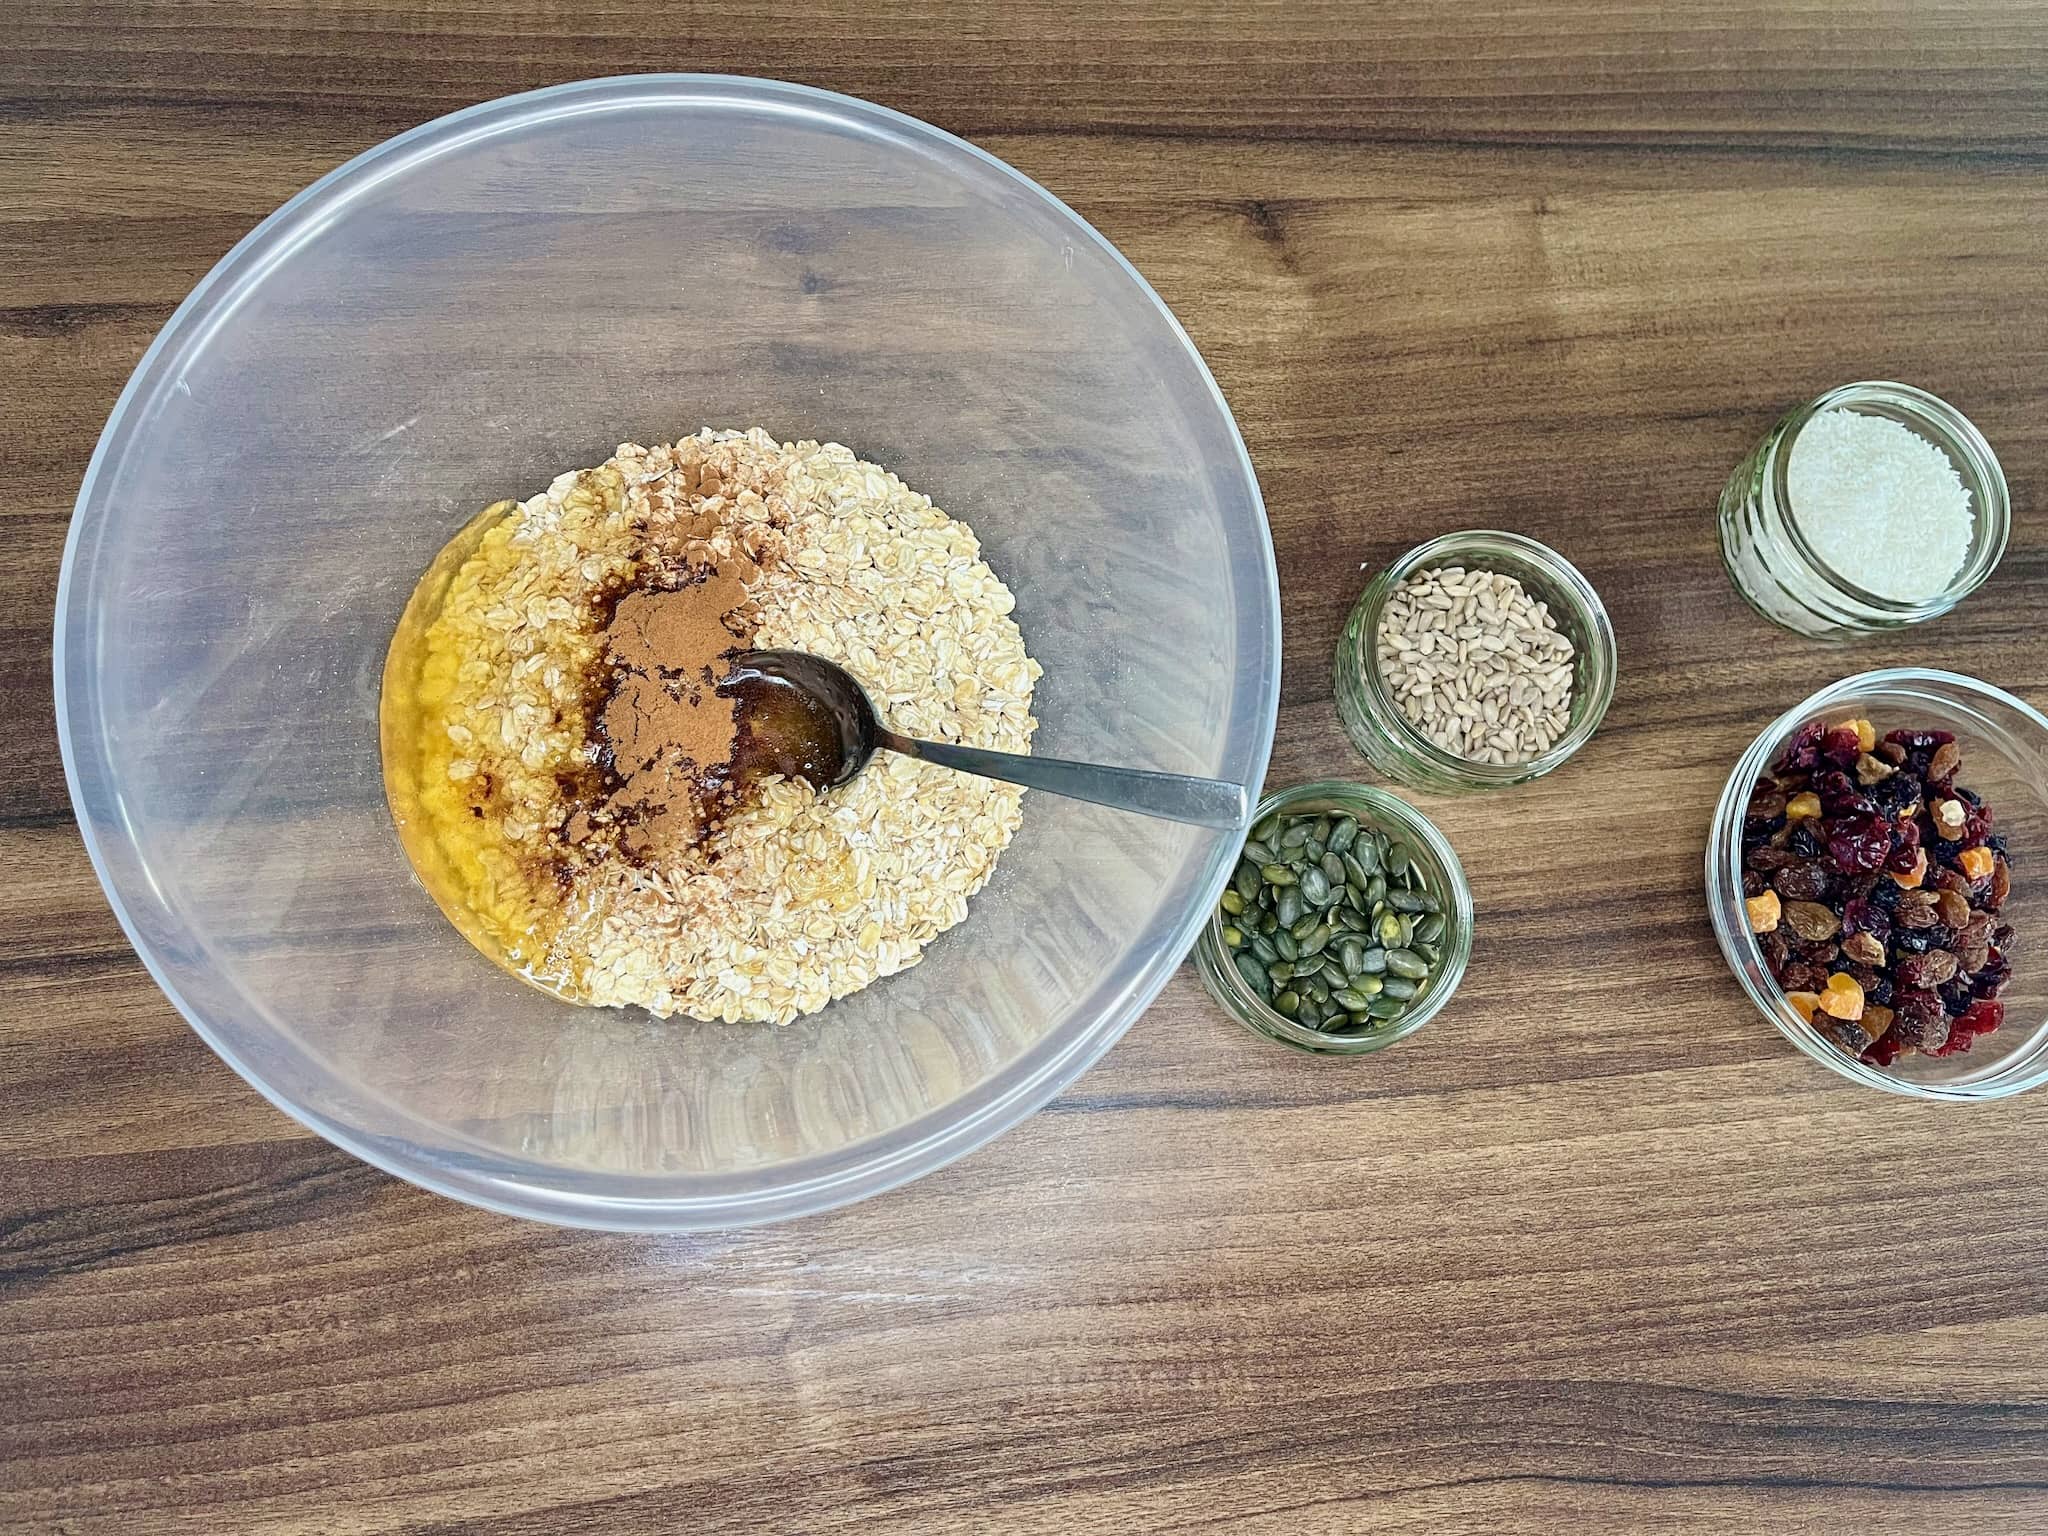 Honey, oil and cinnamon ground mixed with oats in a bowl